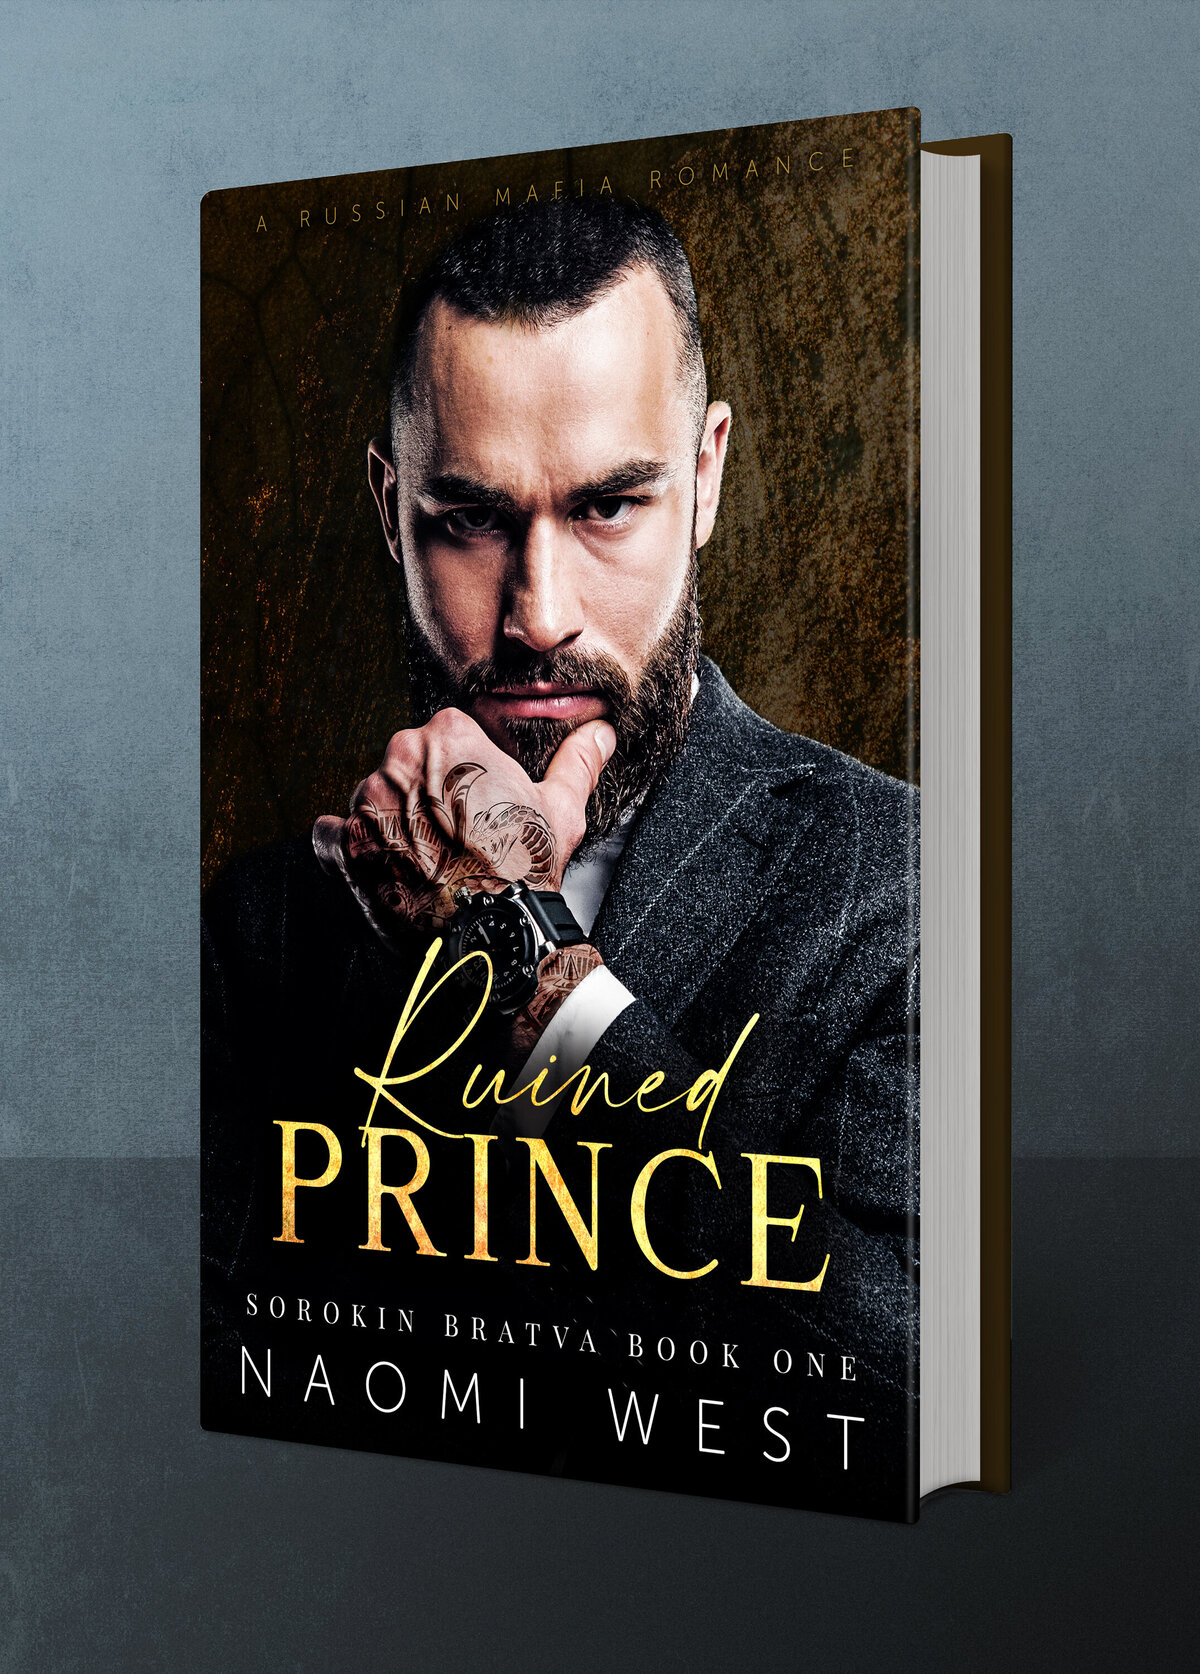 Ruined Prince by Naomi West